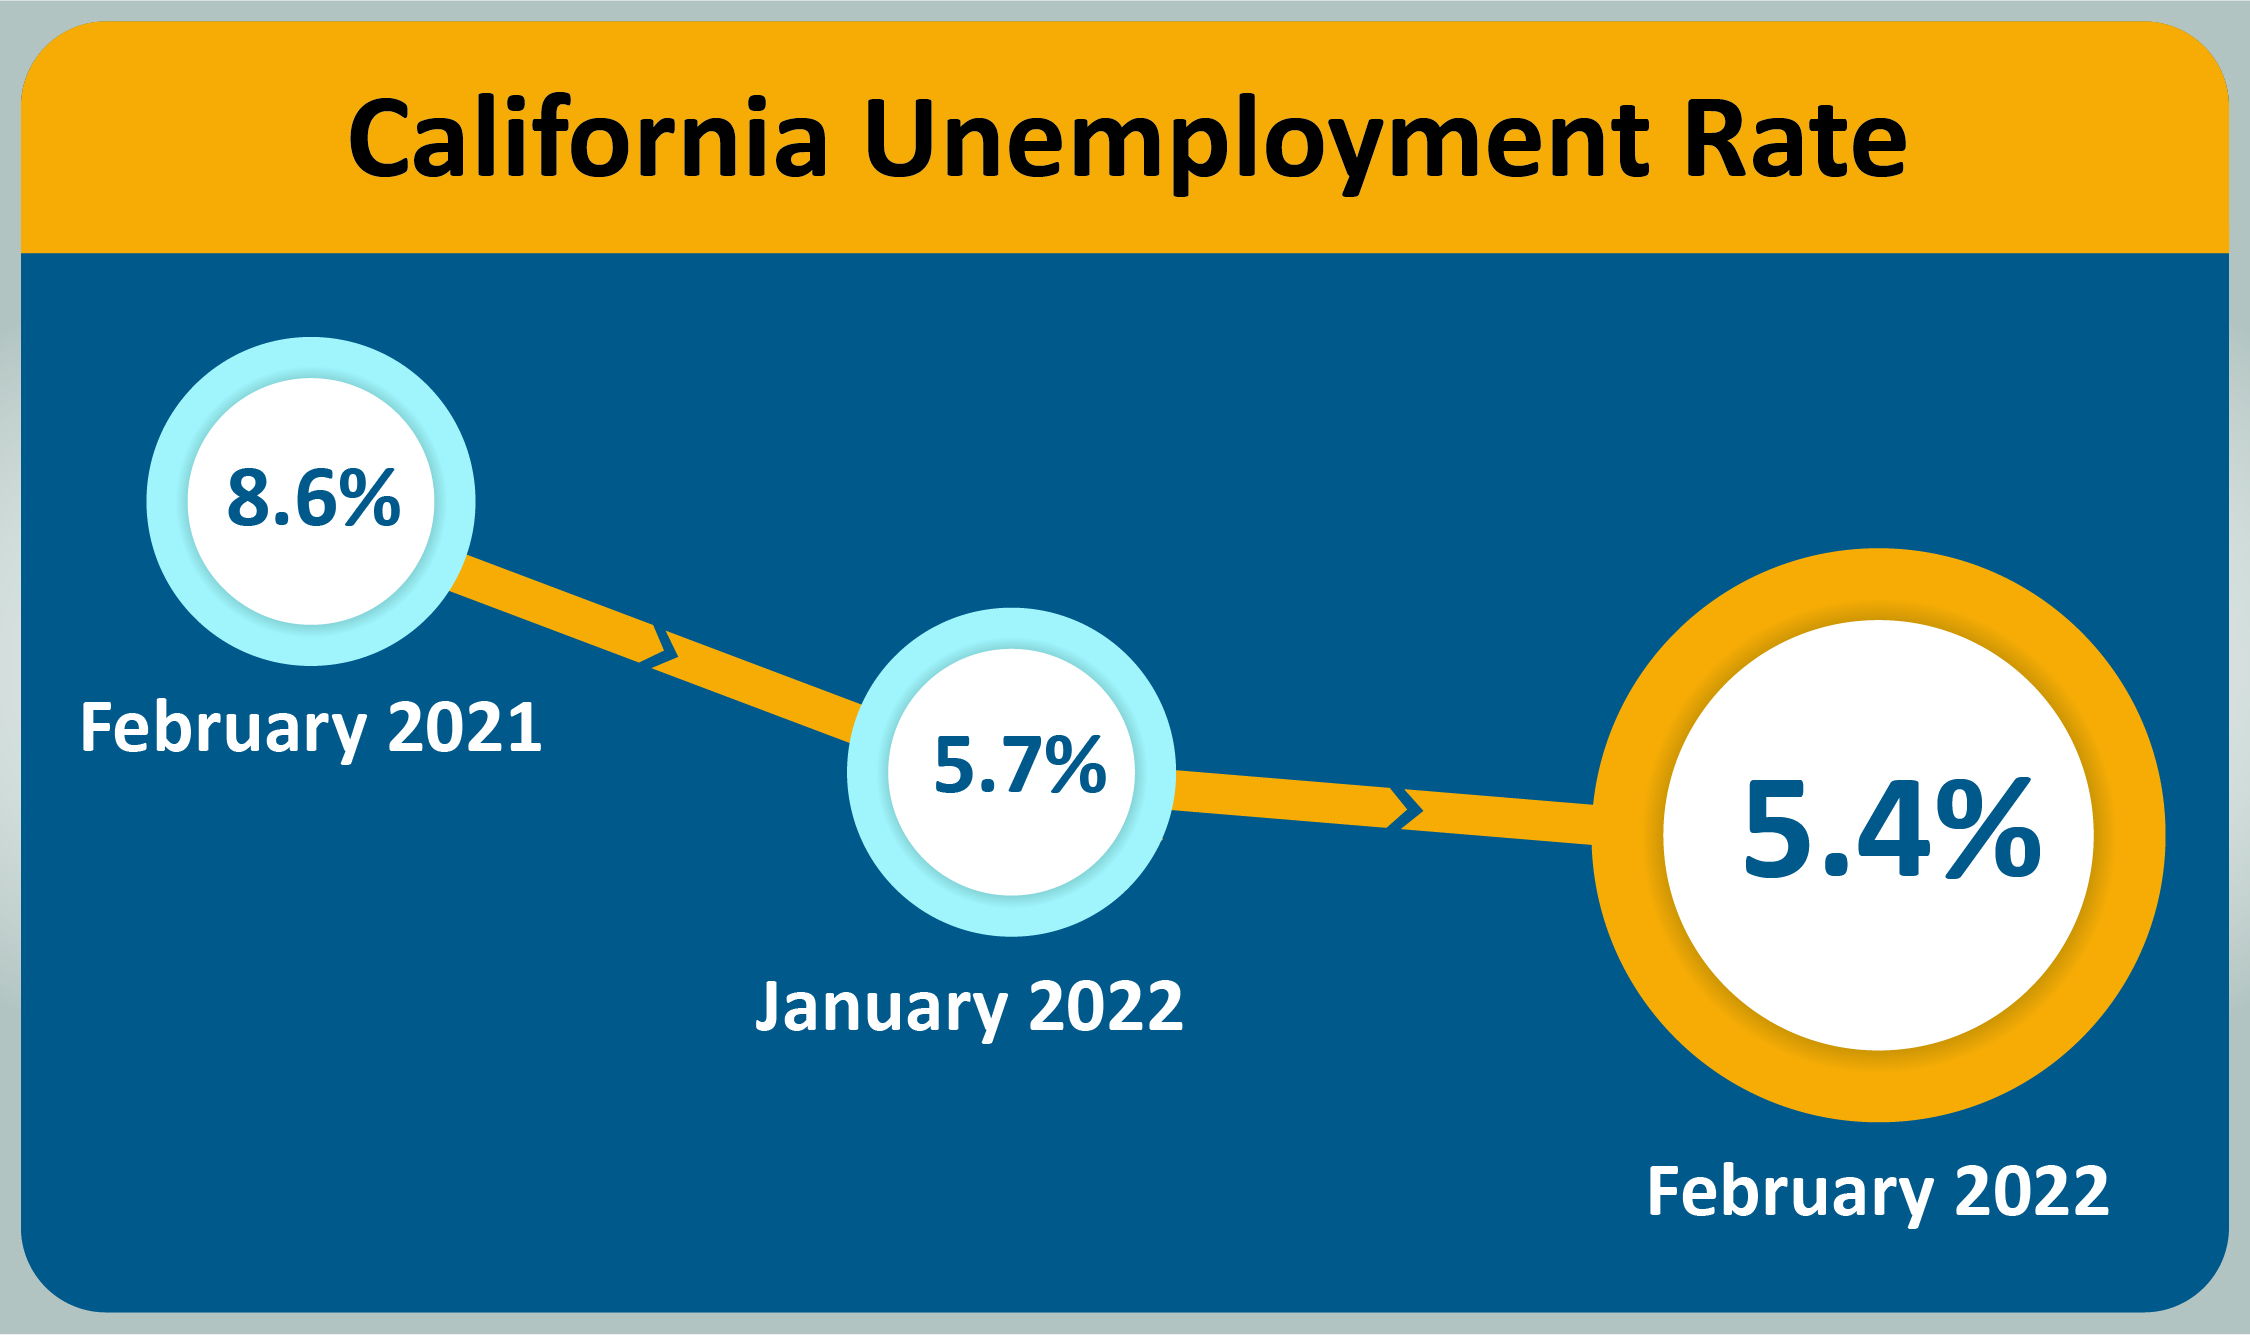 The California unemployment rate is 5.4 percent as of February, 2022.